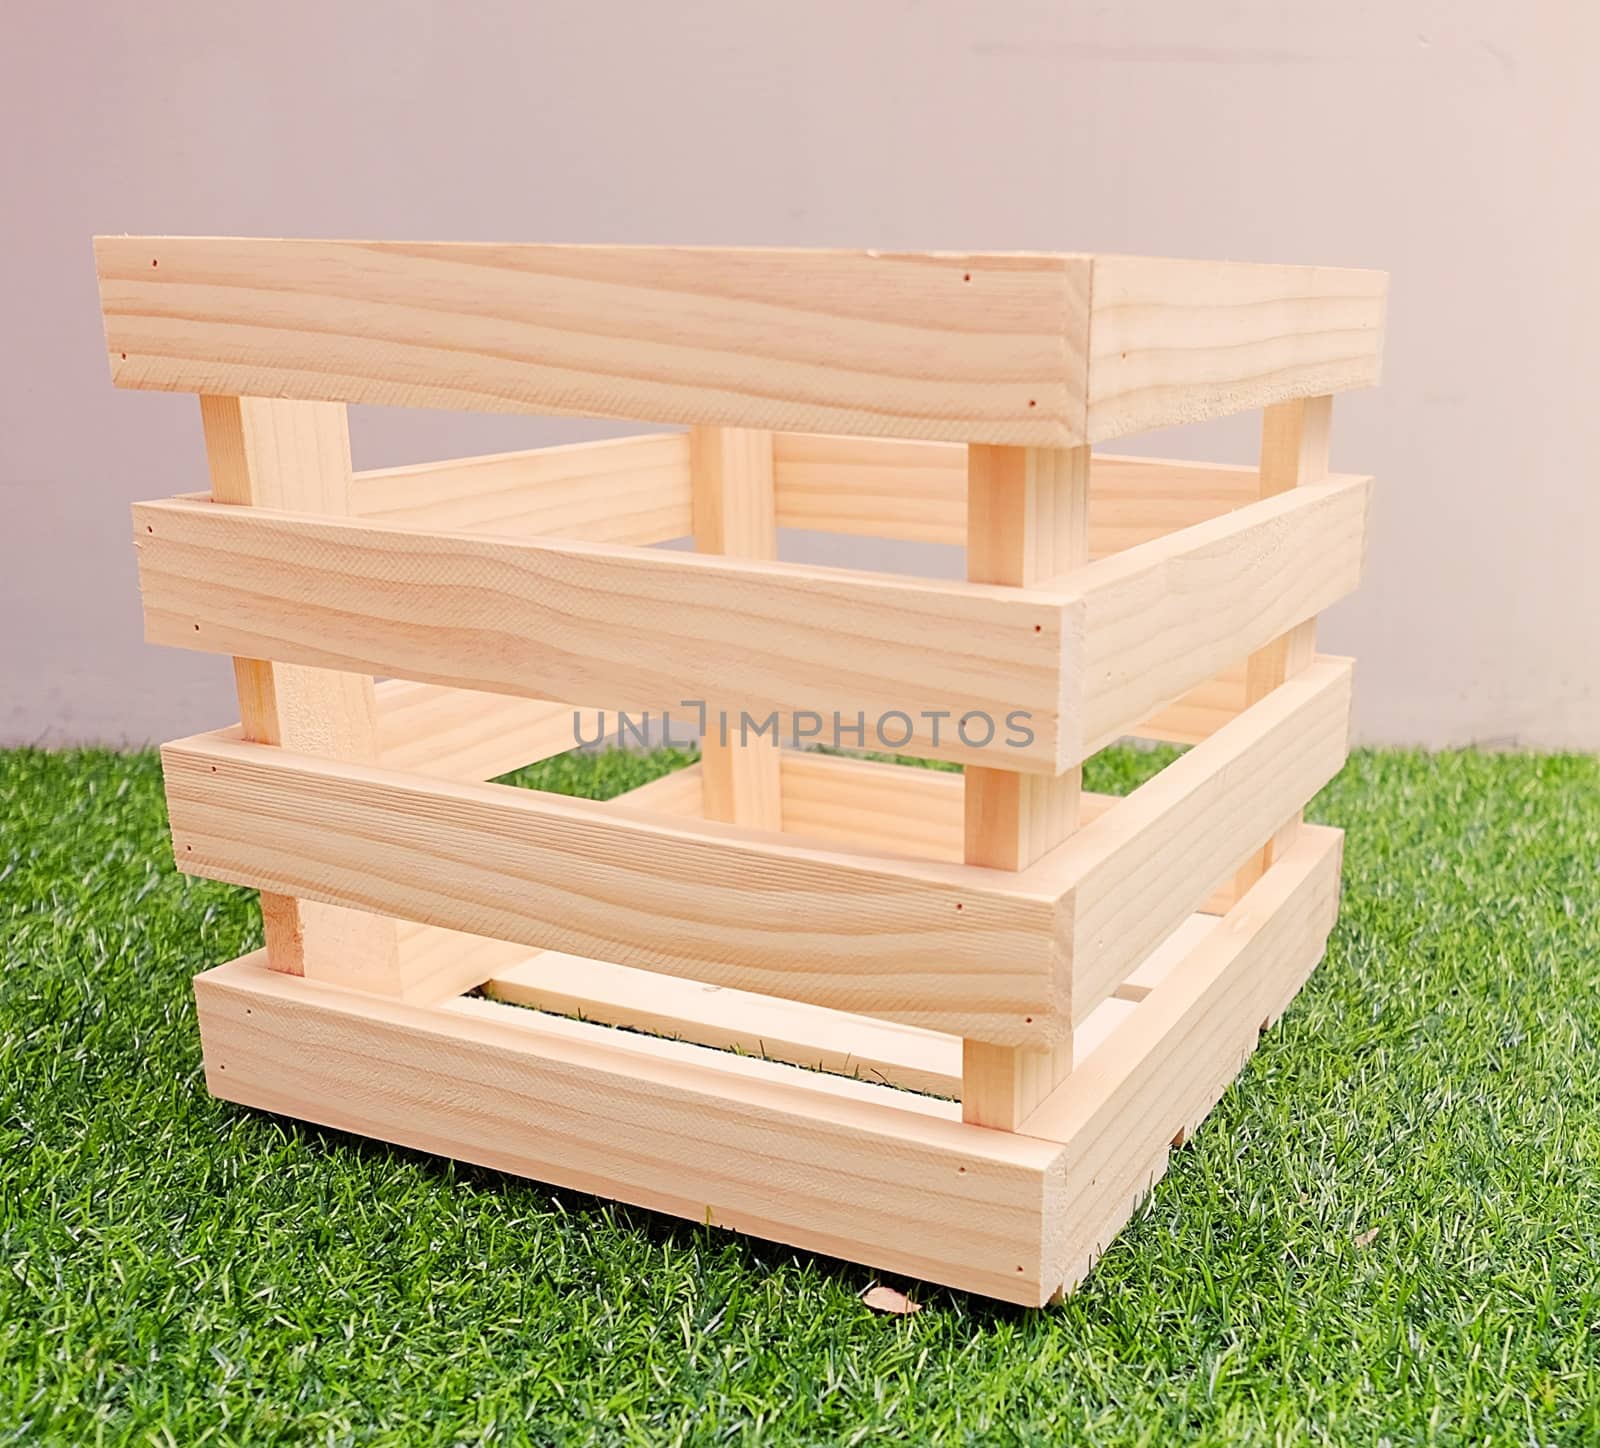 Wooden Box with Green Grass